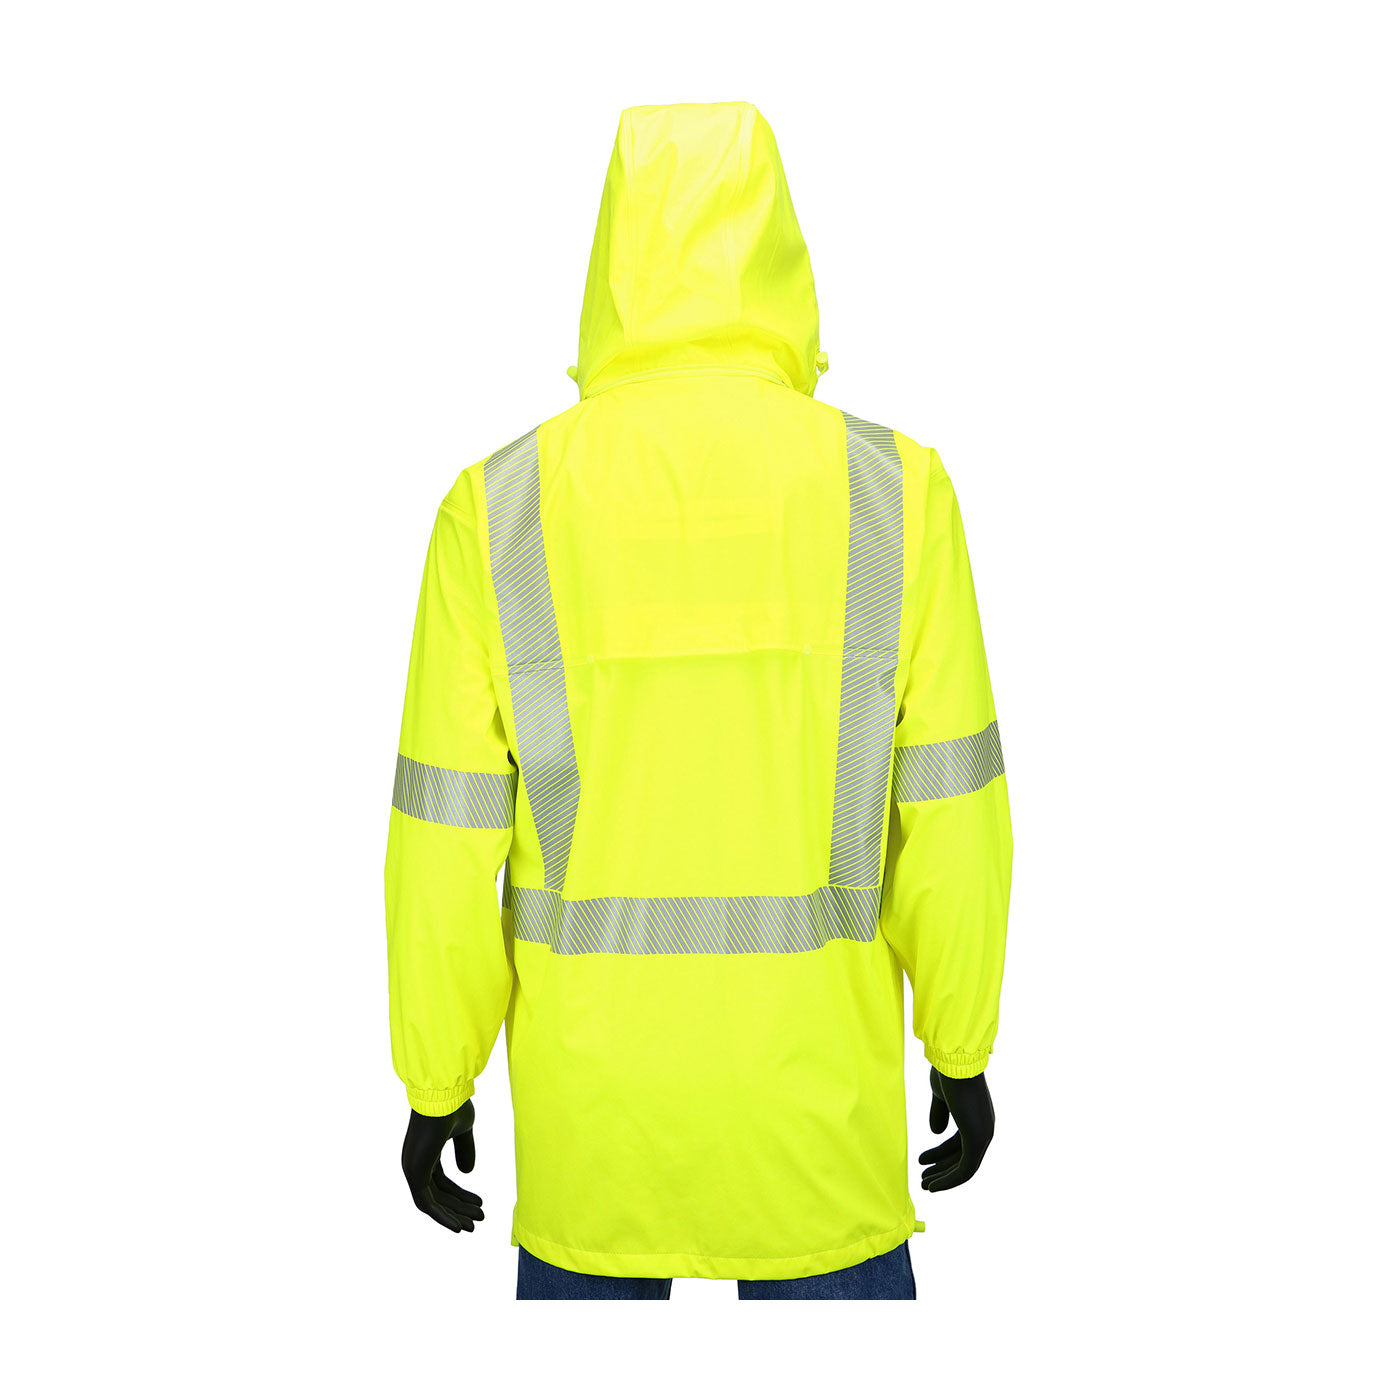 West Chester 4541J/M Type R Class 3 Waterproof Breathable Rain Jacket